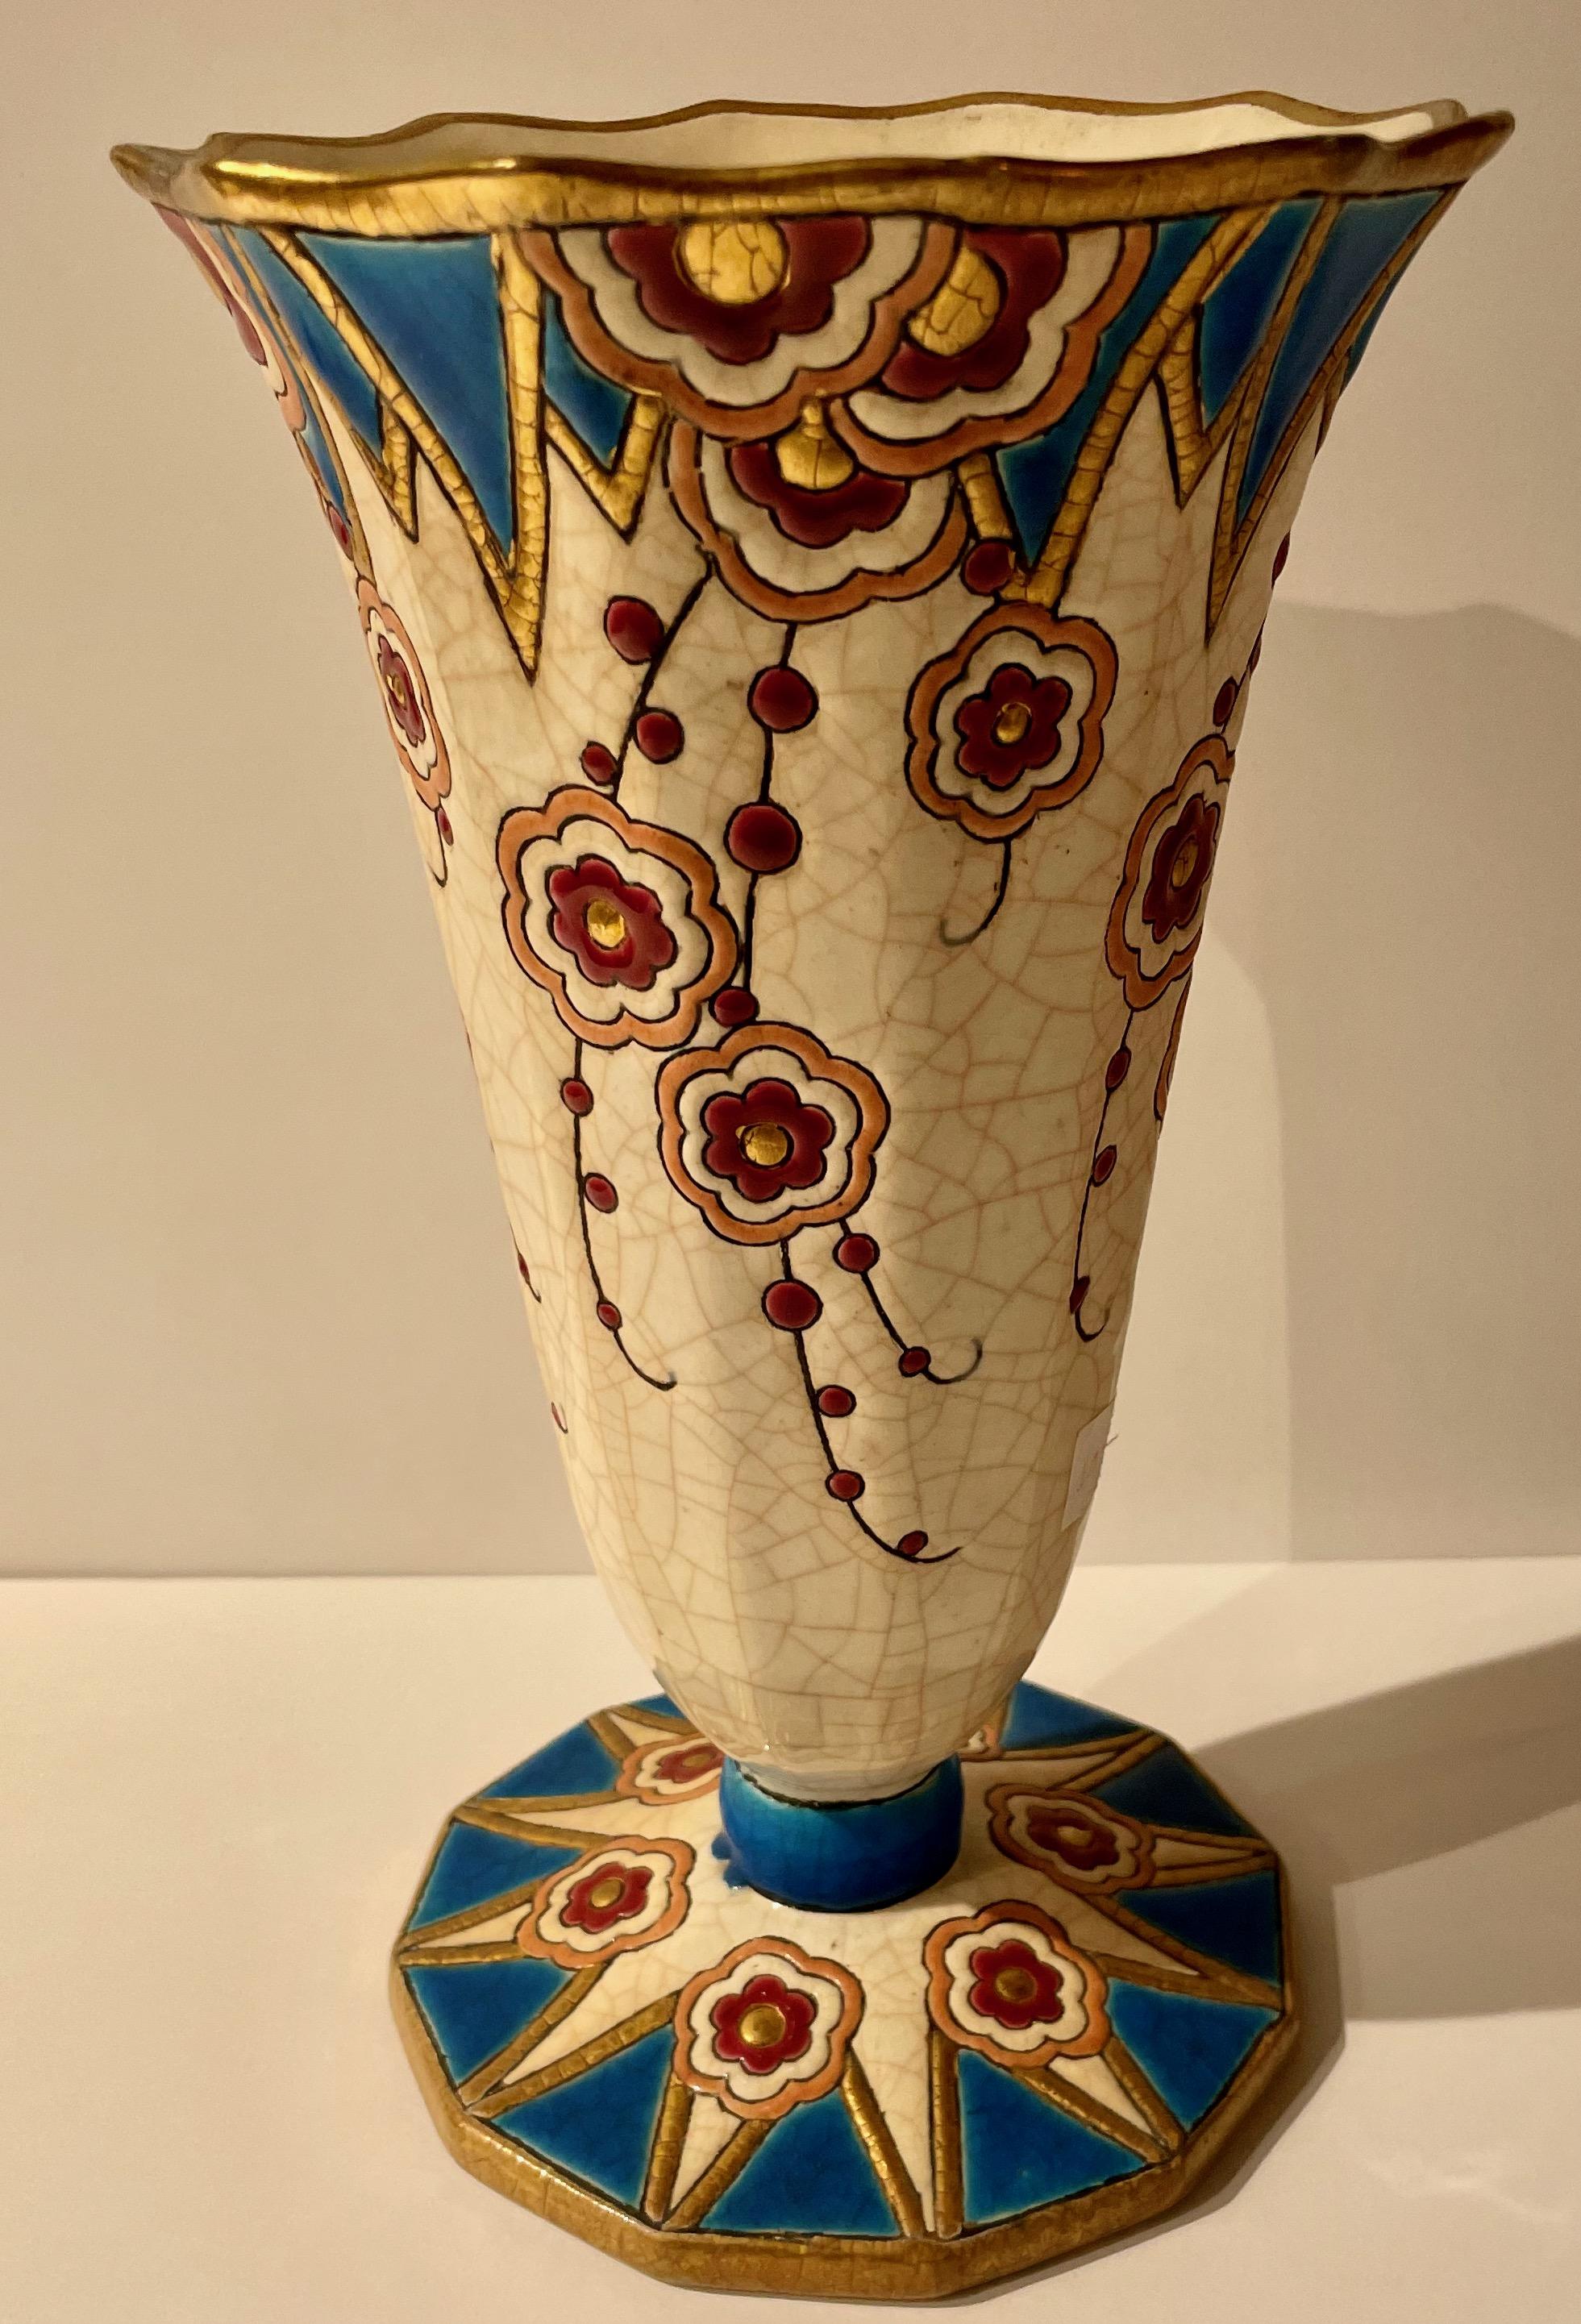 Longwy Art Deco French Cloisonné Ceramic Vase. Stunning color with faceted base with blue, gold circular droplets intersected throughout the design of the vase. Gold detailing around the base and the top help to frame and accentuate this stunning